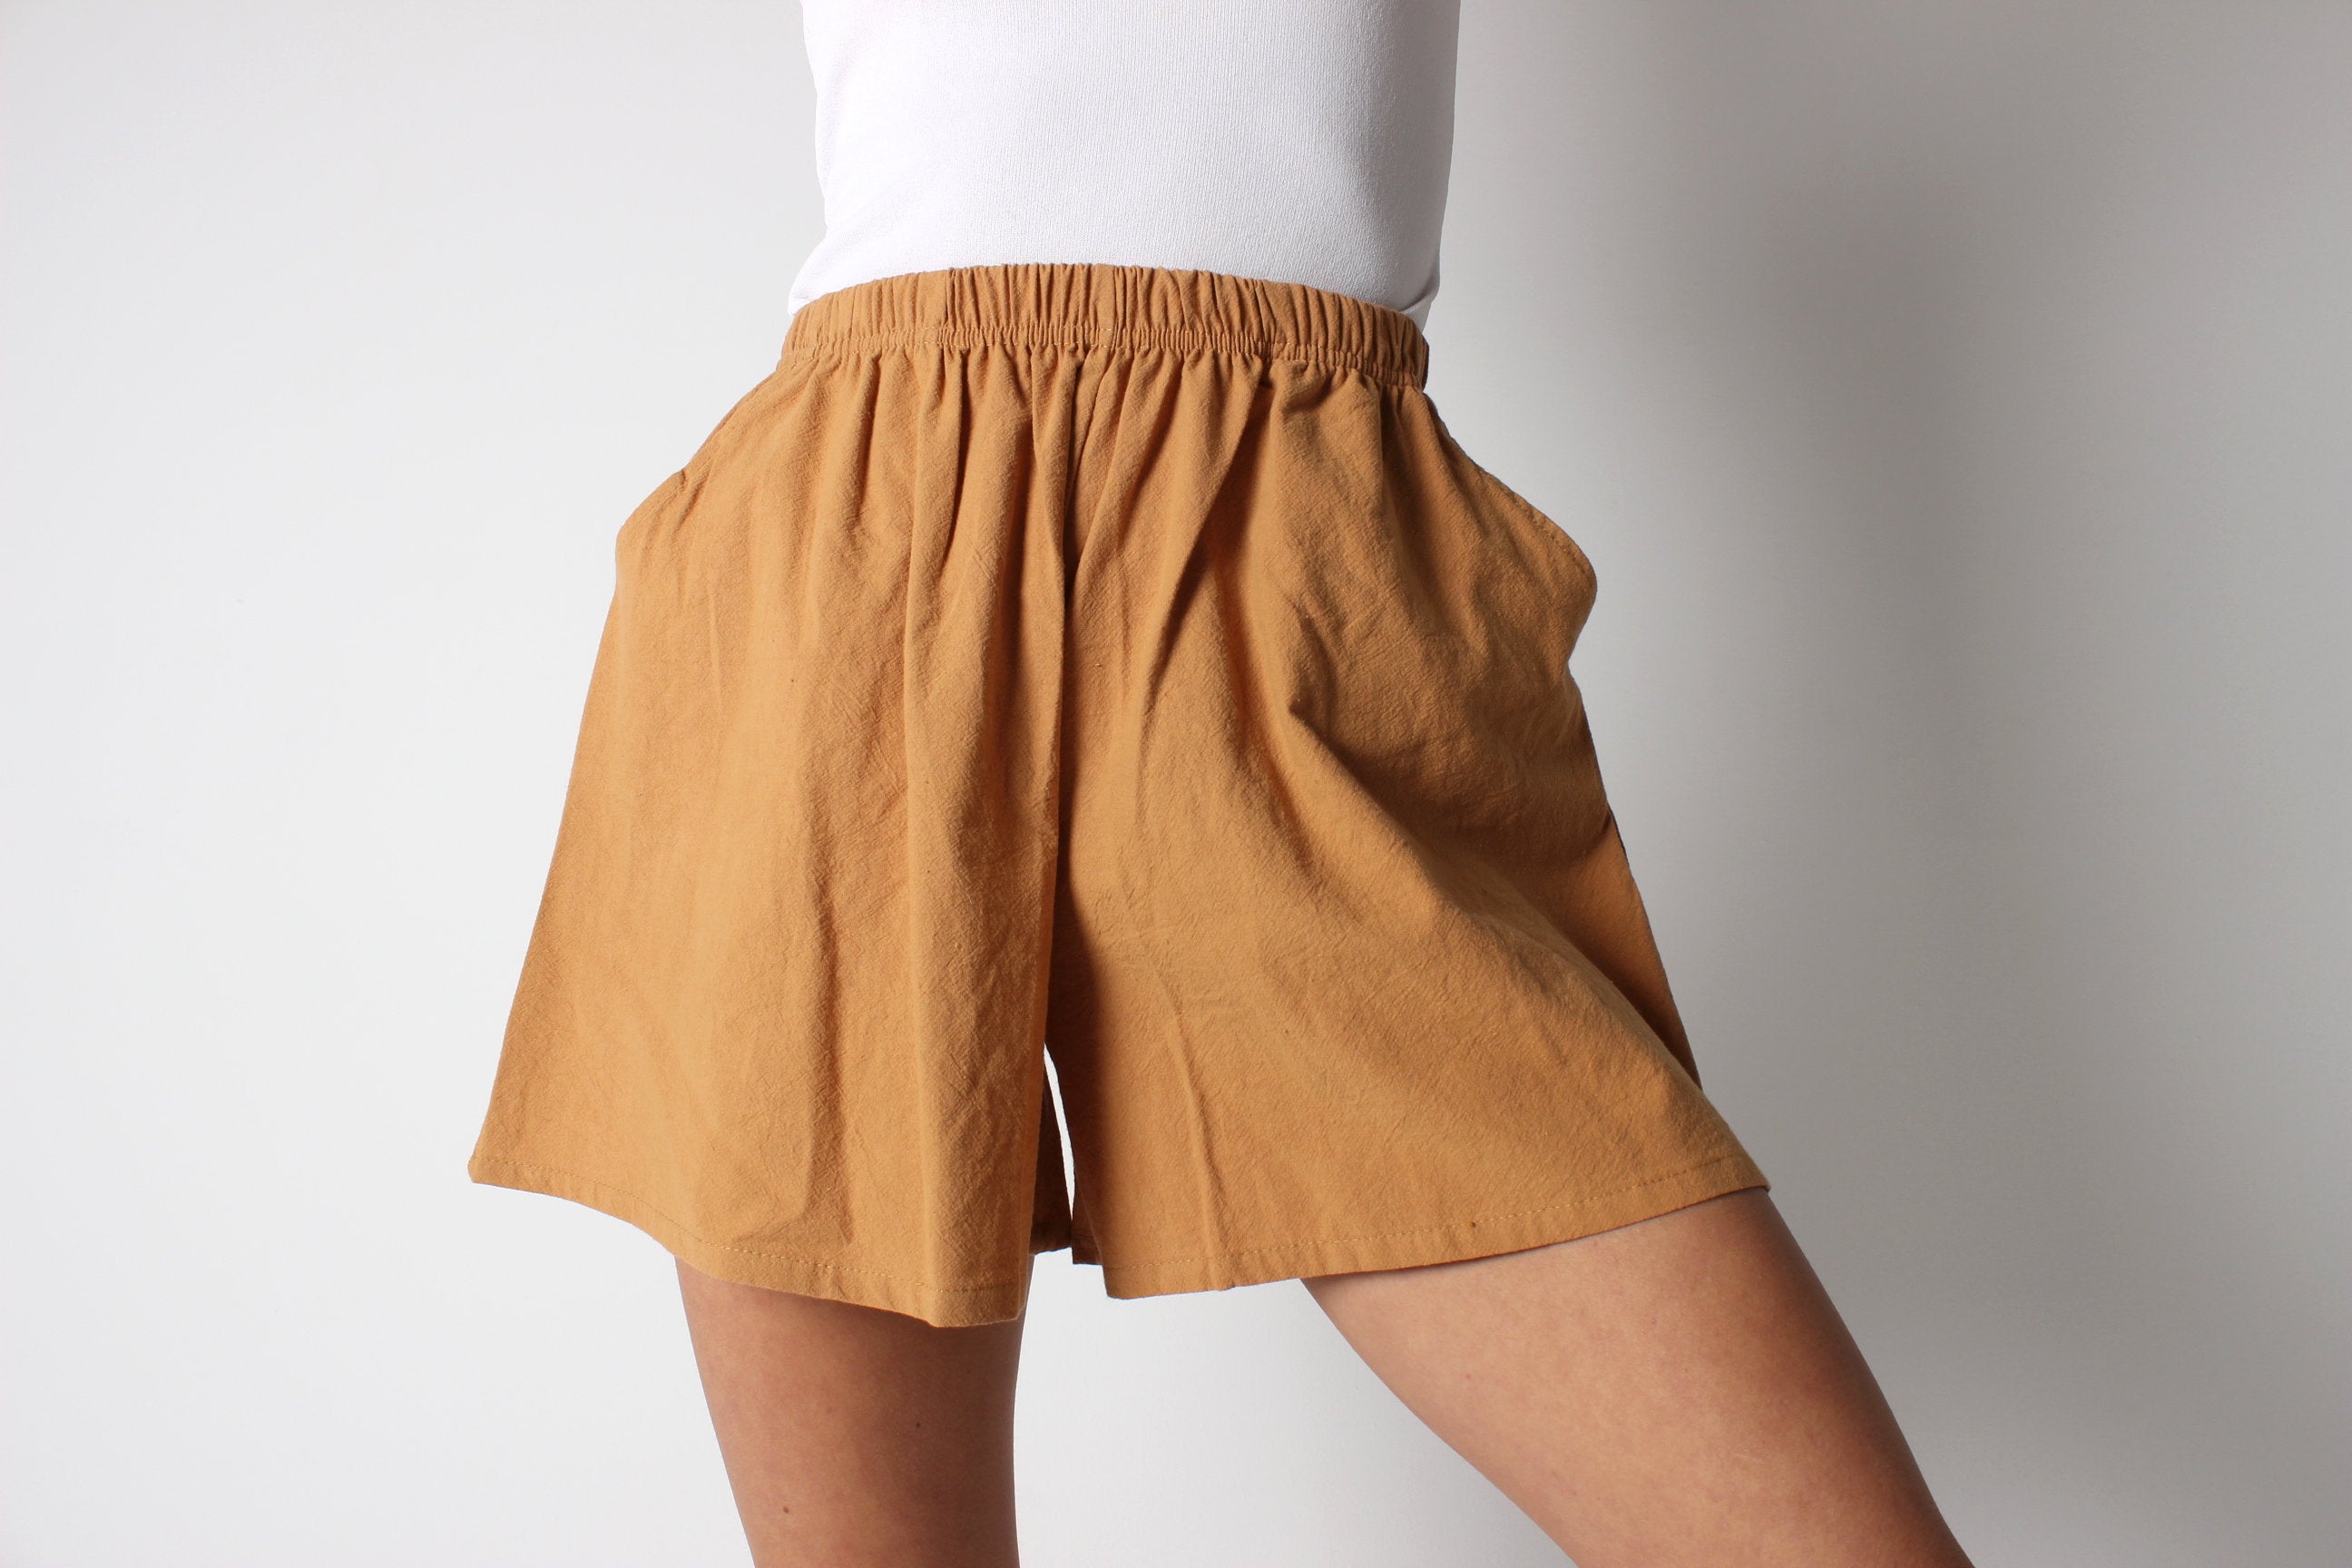 The Famous Shorts - Cotton / Linen Blend Stretch Waist Flared Leg Shorts - In Marigold